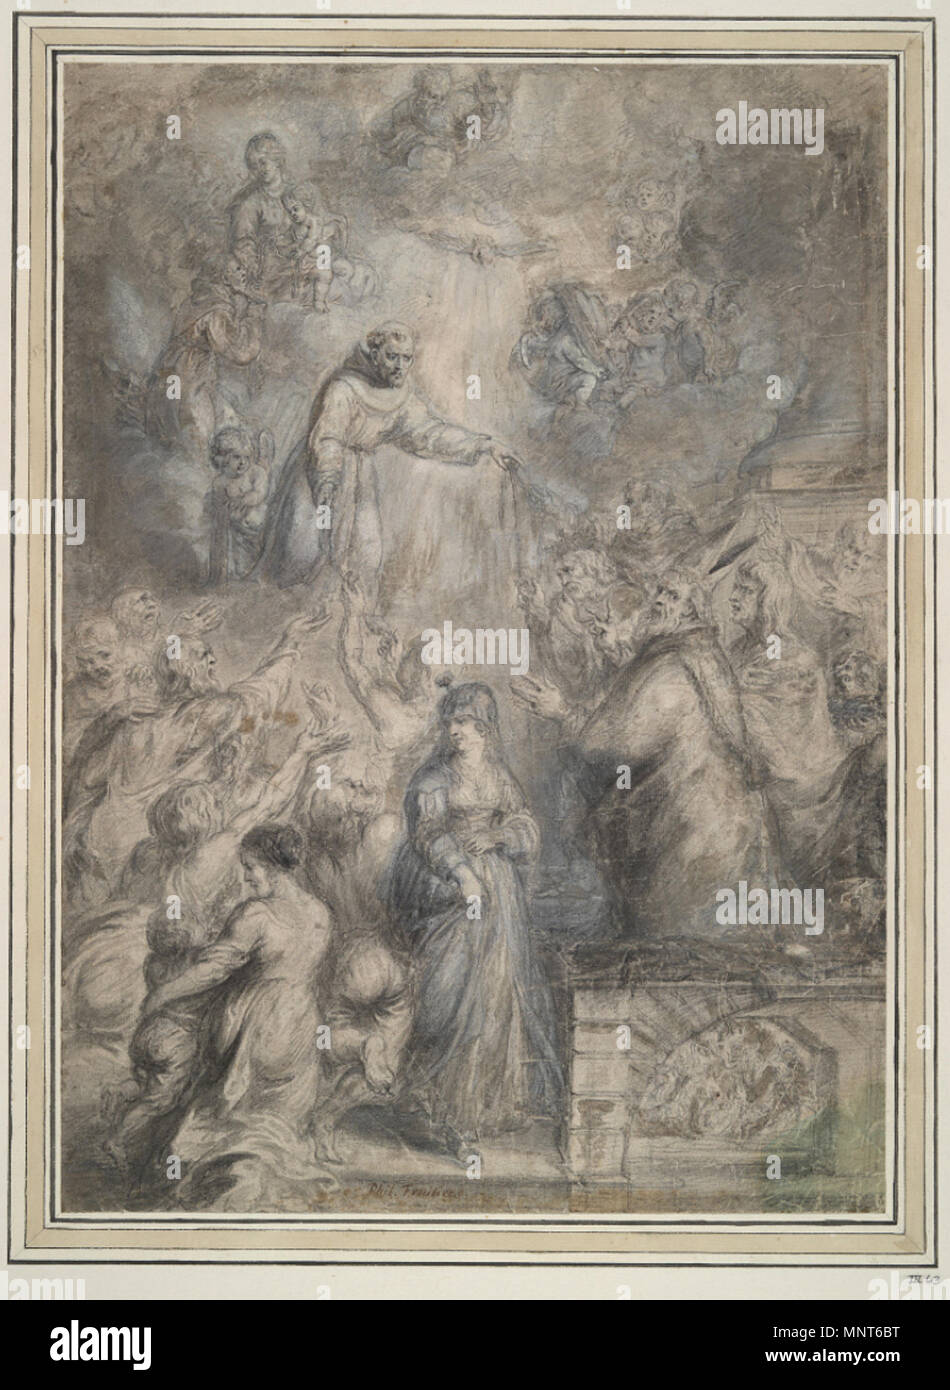 . English: Philip Fruytiers, The Distribution of Franciscan Cords, Black chalk and brush and gray ink heightened with white (partly oxidized), traced for transfer, Sheet: 37.8 x 27.1 cm (14 7/8 x 10 11/16 in.), 1647-1649, Yale University Art Gallery . 17th century.   Philip Fruytiers  (1610–1666)    Alternative names Philip Fruijtiers, P.H. Francken, Philip Fruitiers, Monogrammist PHF  Description Flemish painter, draughtsman, printmaker and miniaturist  Date of birth/death 10 January 1610 19 June 1666  Location of birth/death Antwerp Antwerp  Work period from 1627 until 1666  Work location An Stock Photo